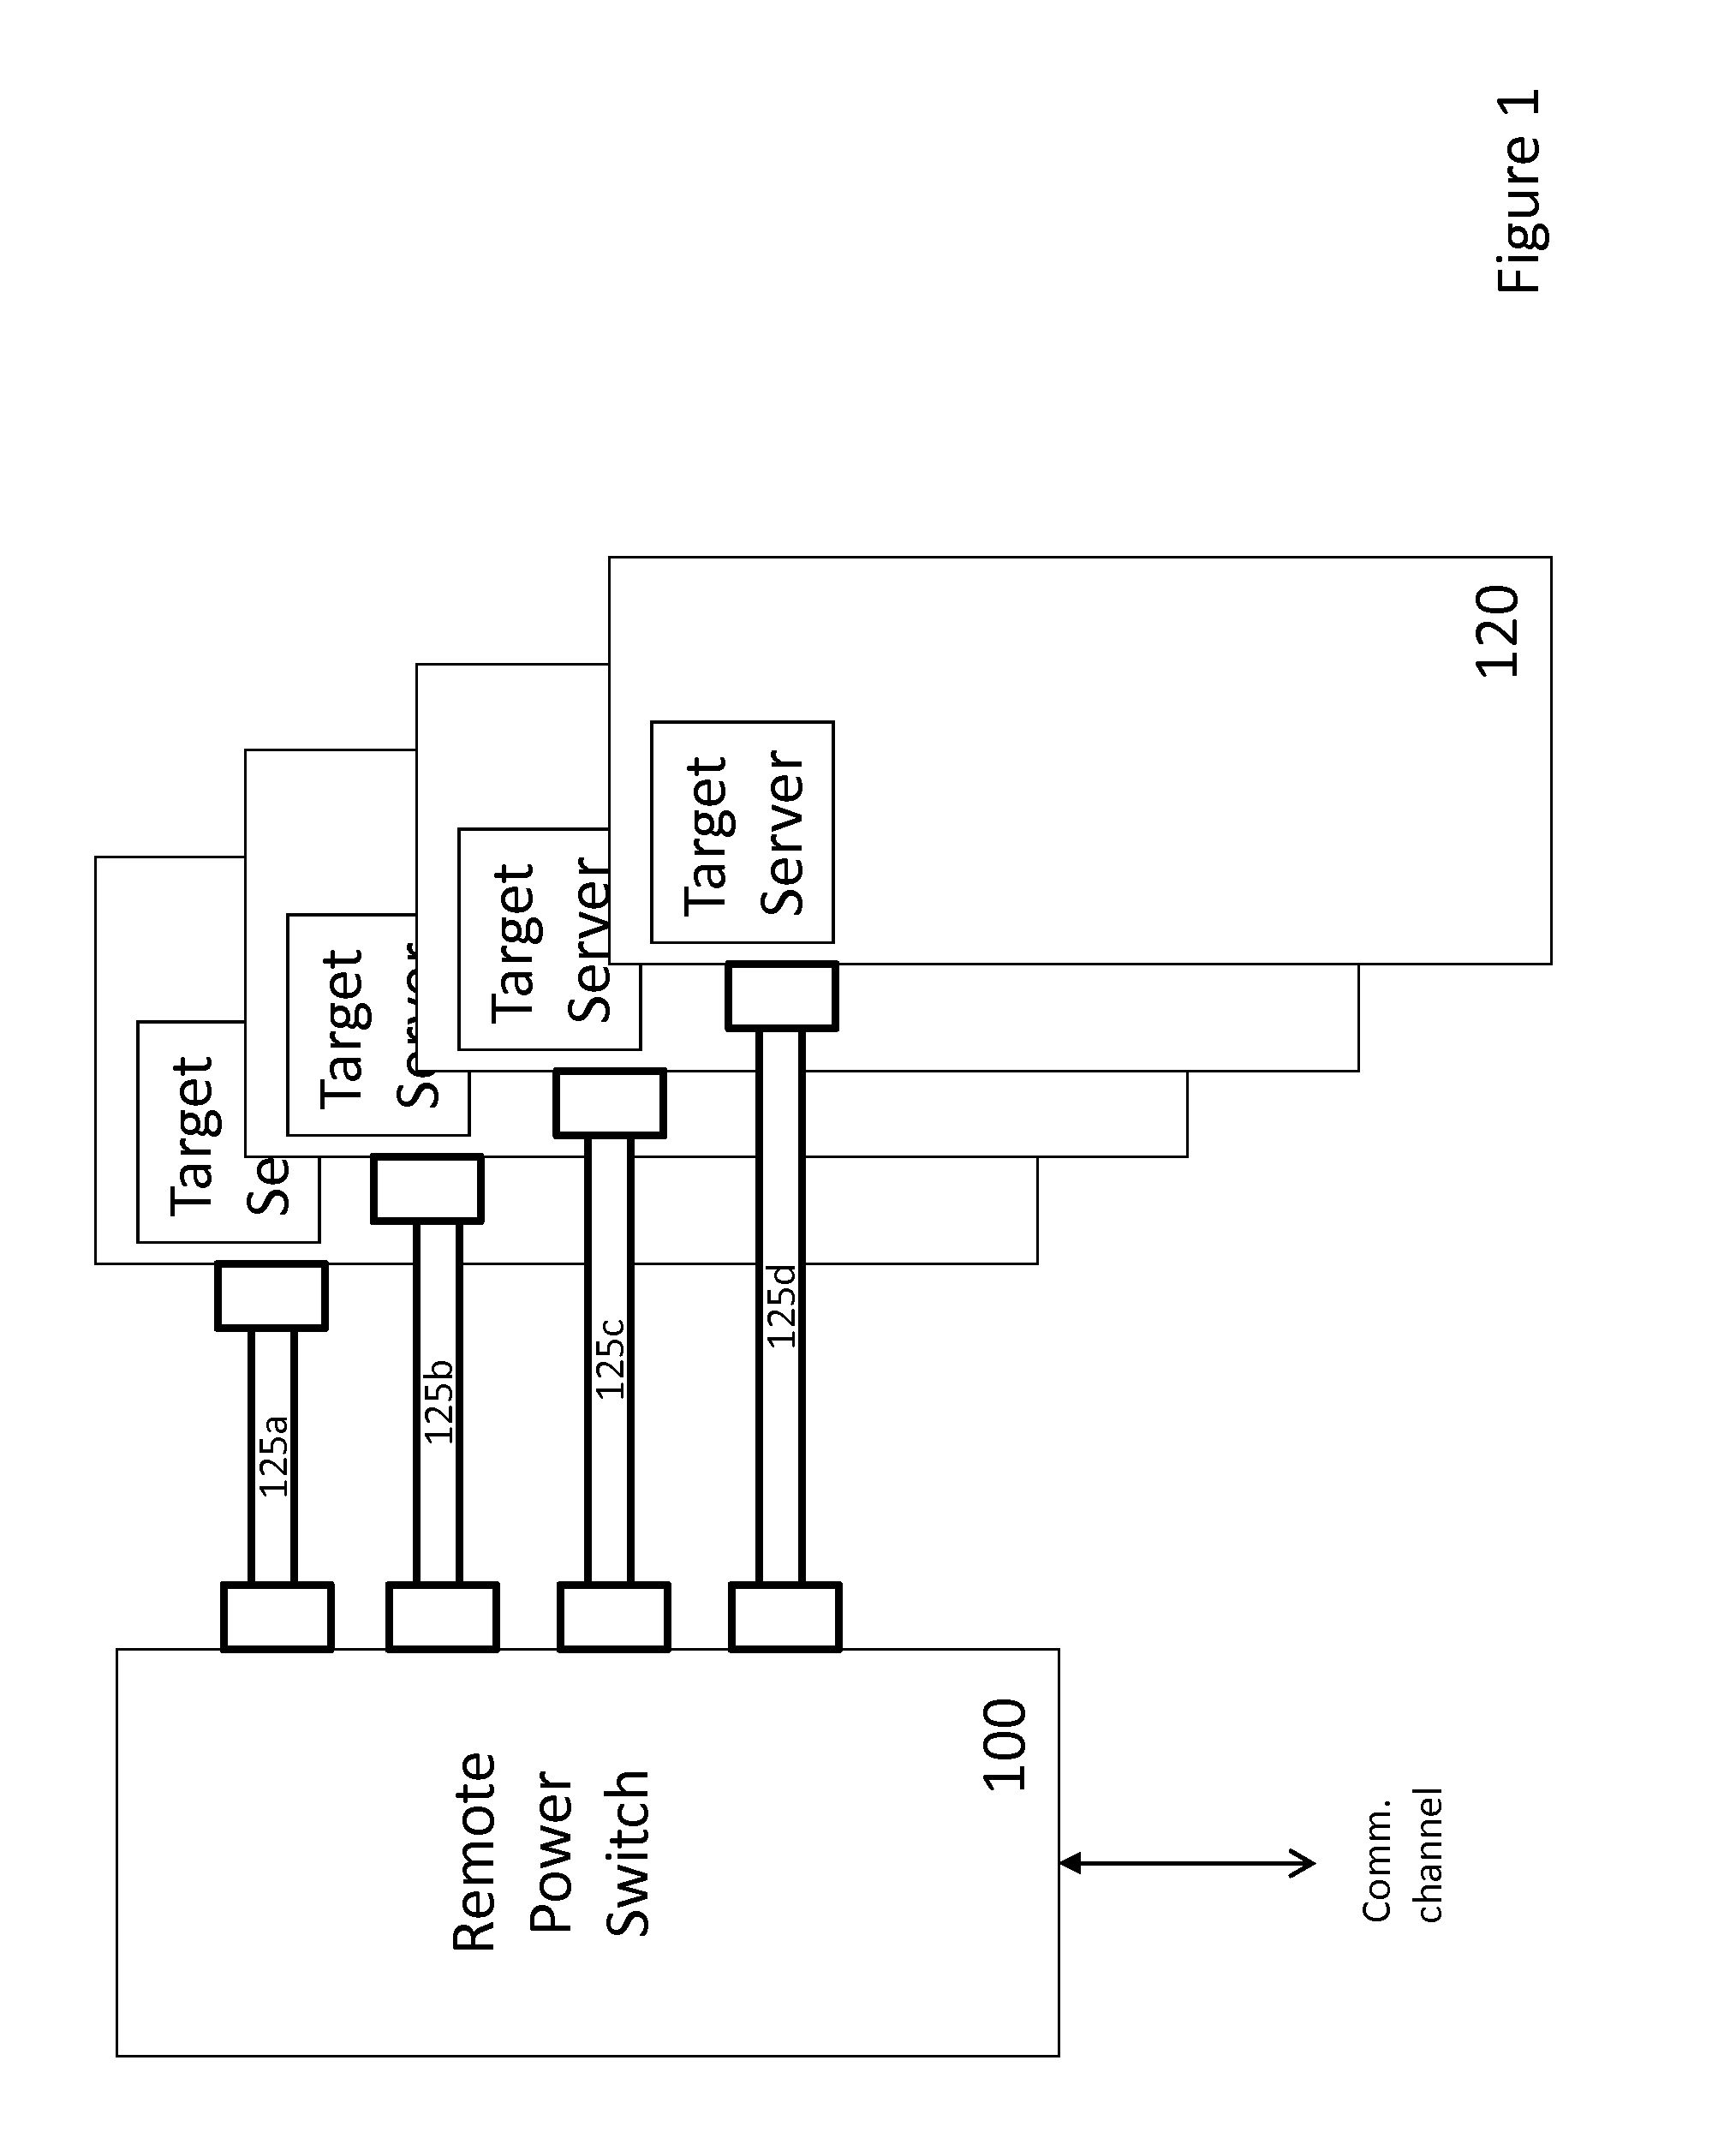 System and Method for Managing and Detecting Server Power Connections